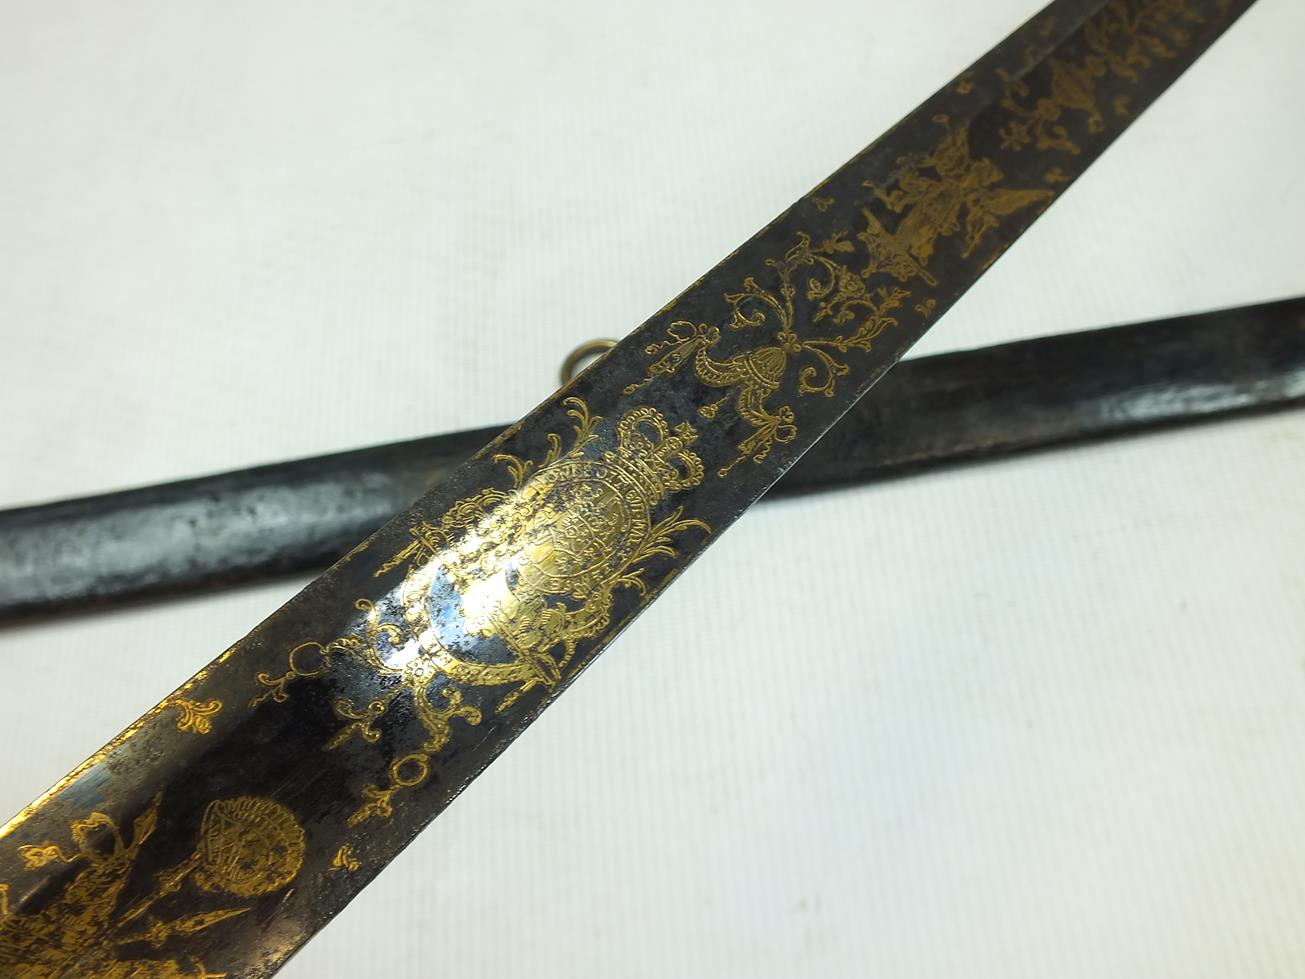 A 1796 PATTERN HEAVY CAVALRY OFFICER'S DRESS SWORD, 87.5cm broad blade profusely decorated with - Image 11 of 25